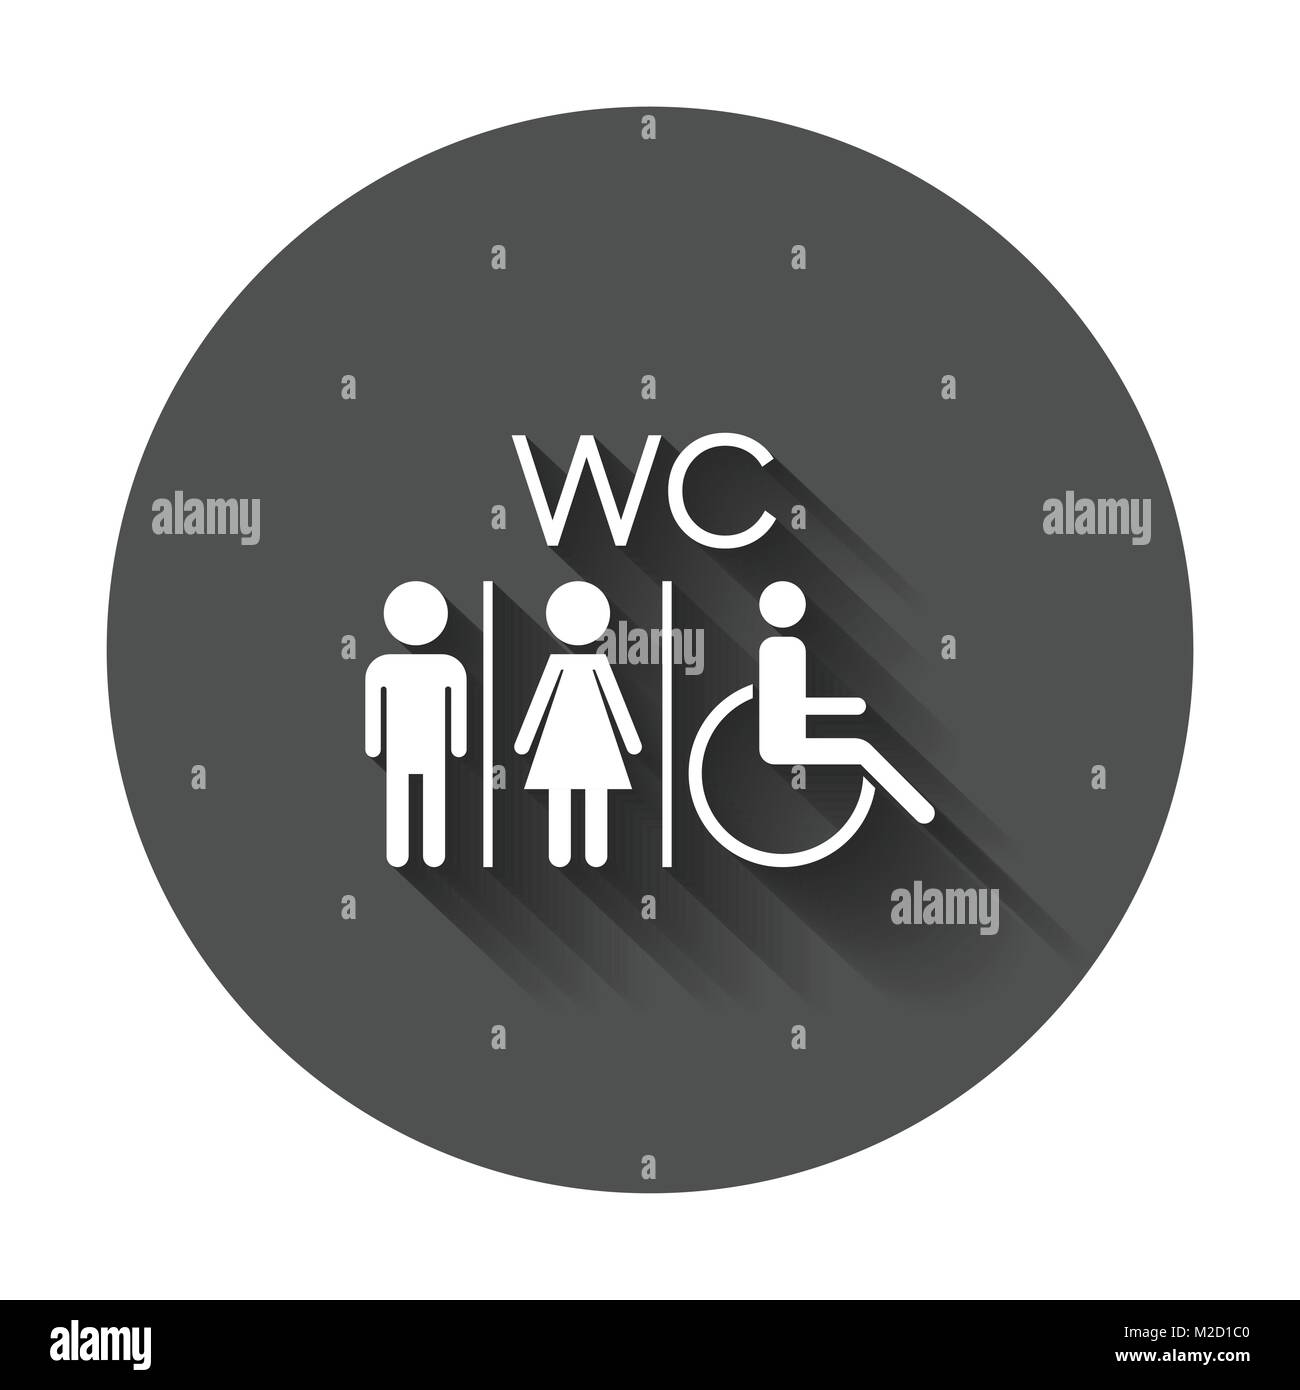 WC, toilet flat vector icon . Men and women sign for restroom with long shadow. Stock Vector